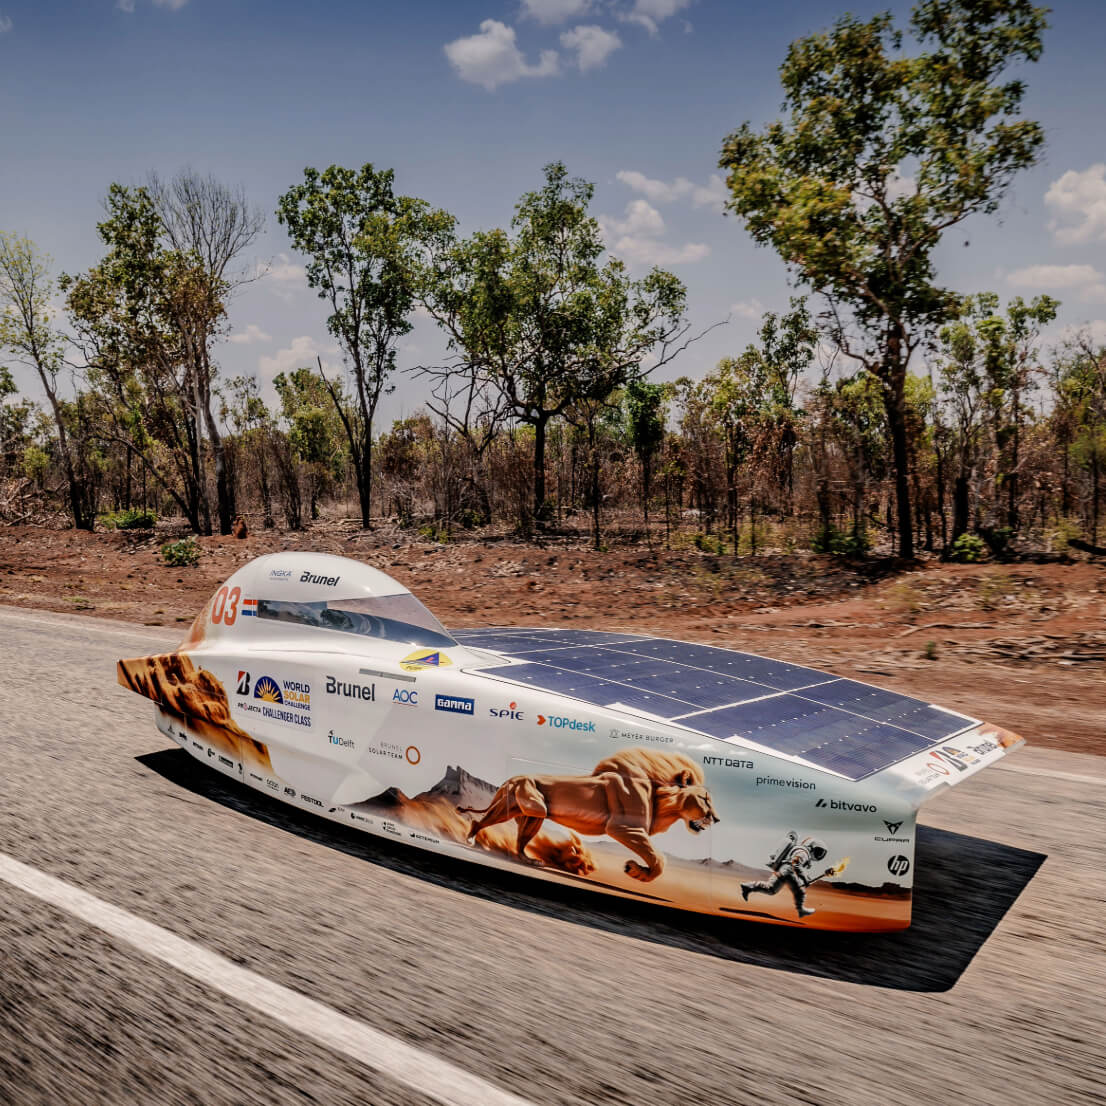 A solar powered vehicle on the road